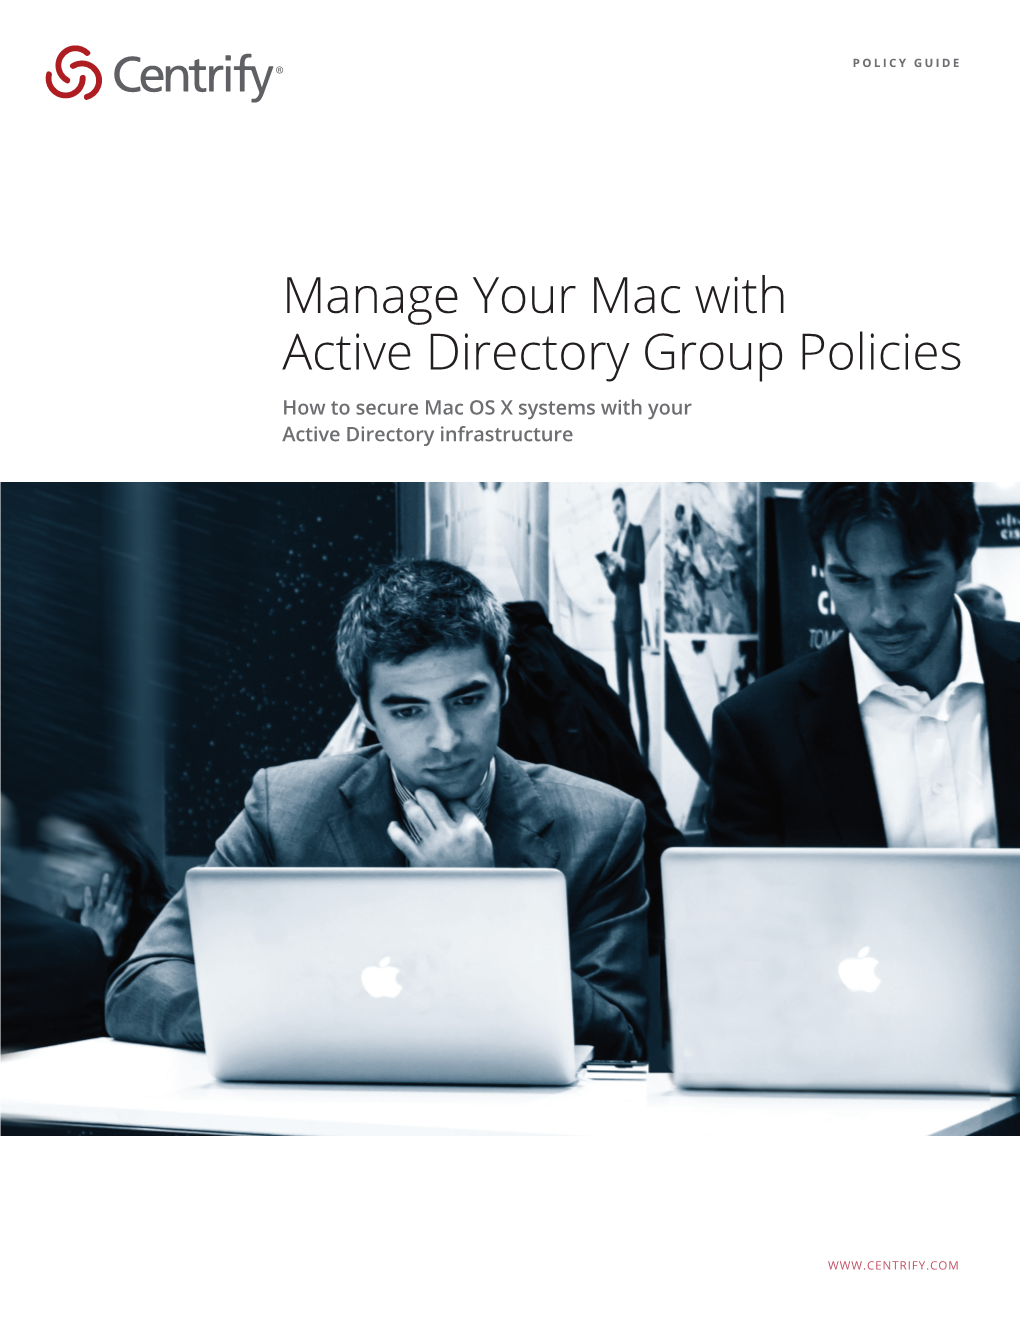 Manage Your Mac with Active Directory Group Policies How to Secure Mac OS X Systems with Your Active Directory Infrastructure